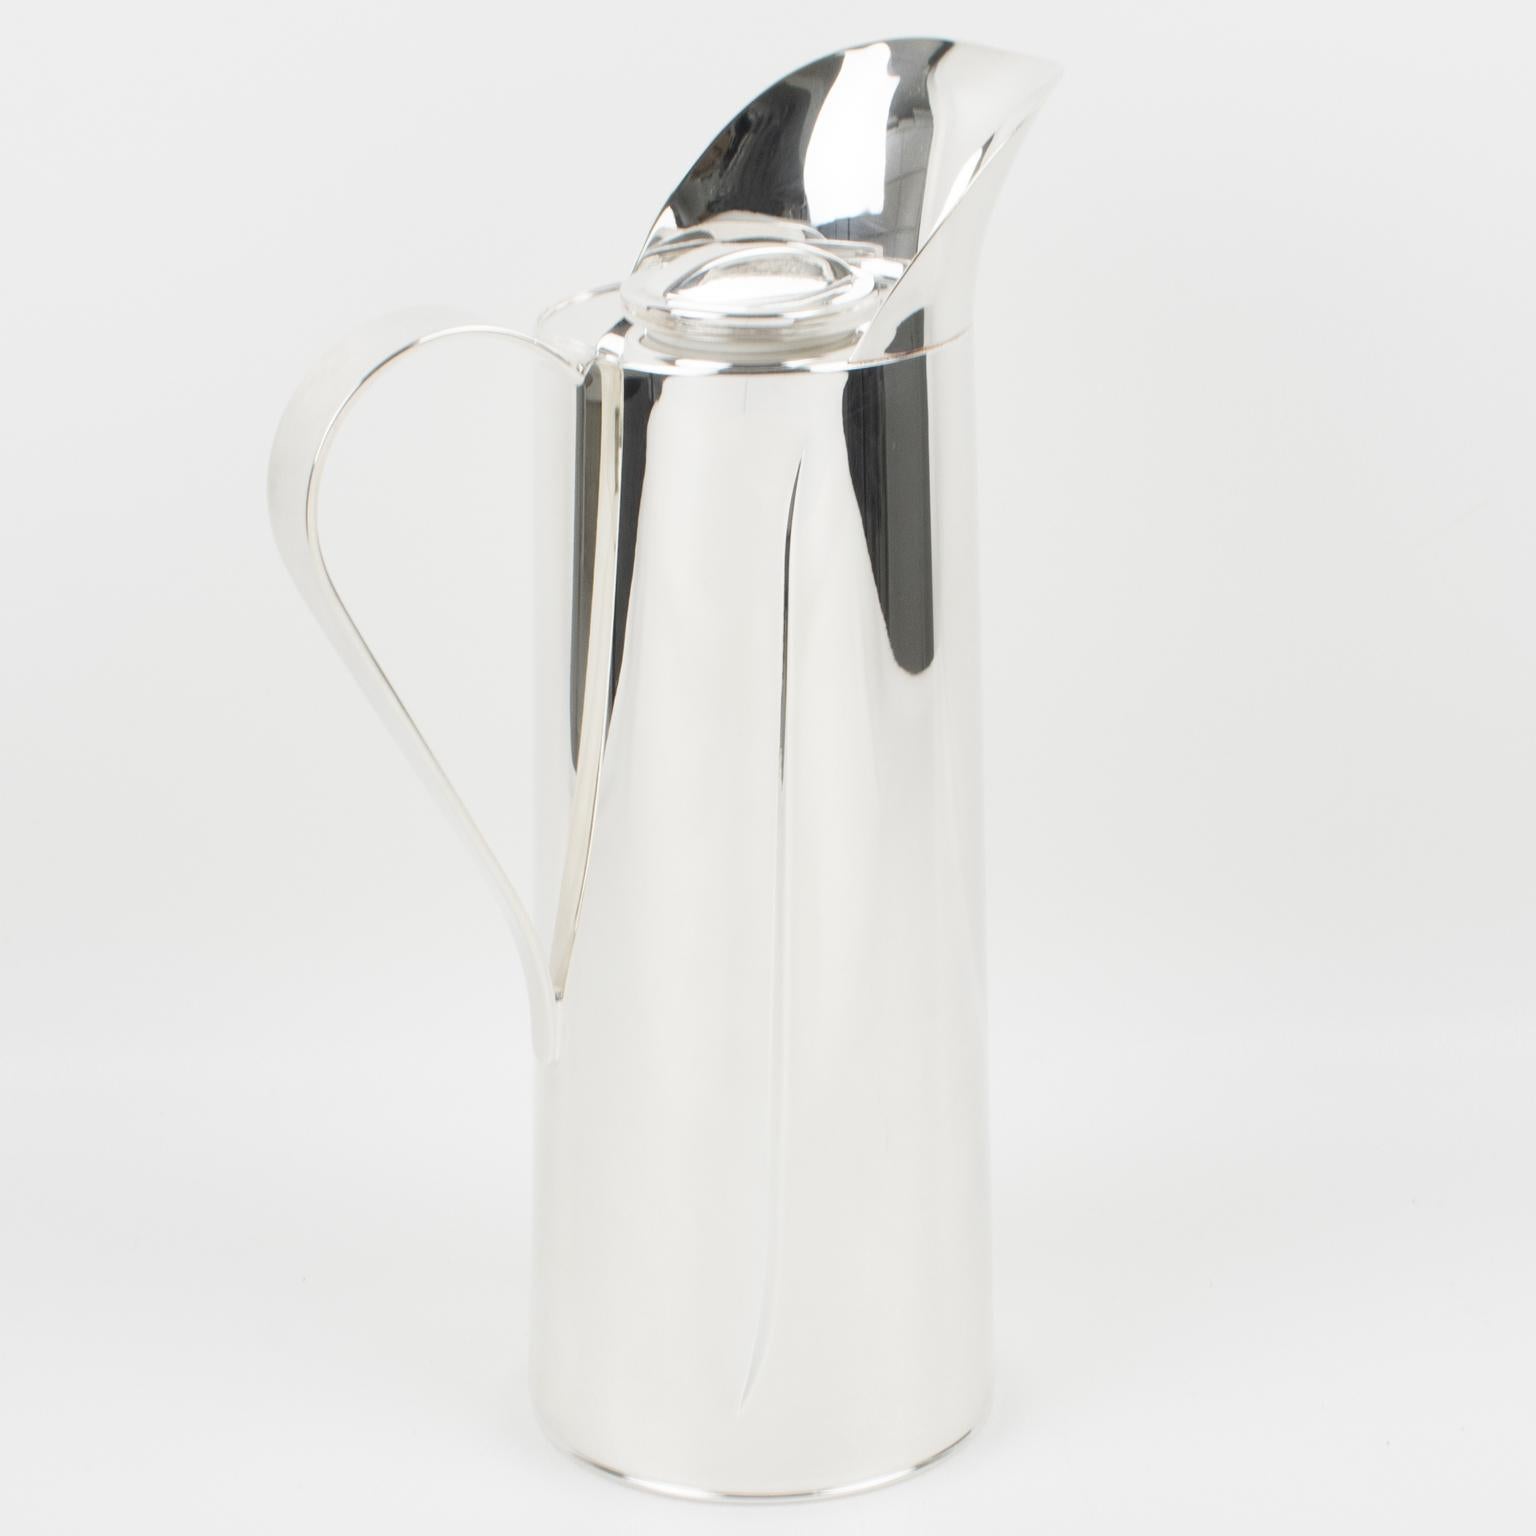 This is an elegant Italian silver plate barware bar thermos or insulated decanter, carafe, or coffee jug. With its sleek and modernist design, this pitcher is made from silver plate metal and features a rounded shape with a large handle and a carved